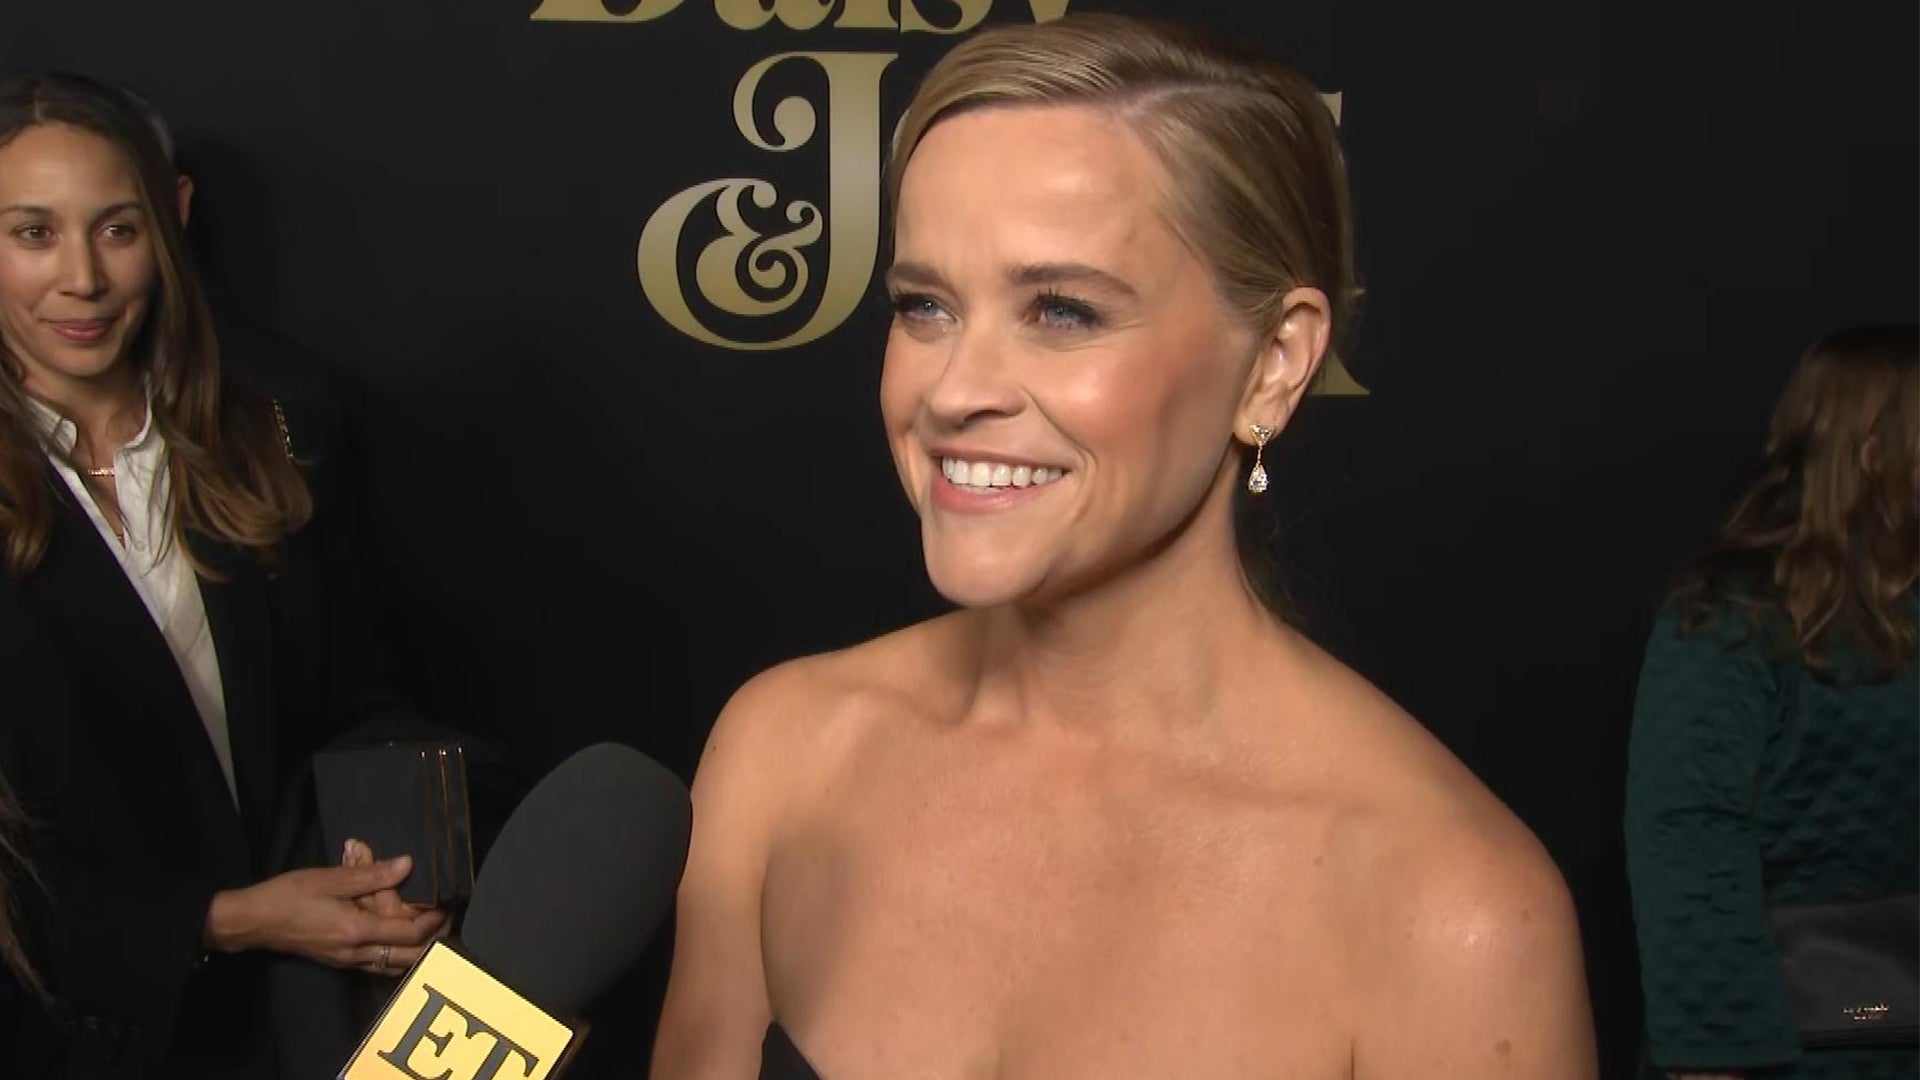 Reese Witherspoon Compares Bond in ‘Daisy Jones & The Six’ to ‘Walk the Line’ Experience (Exclusive)